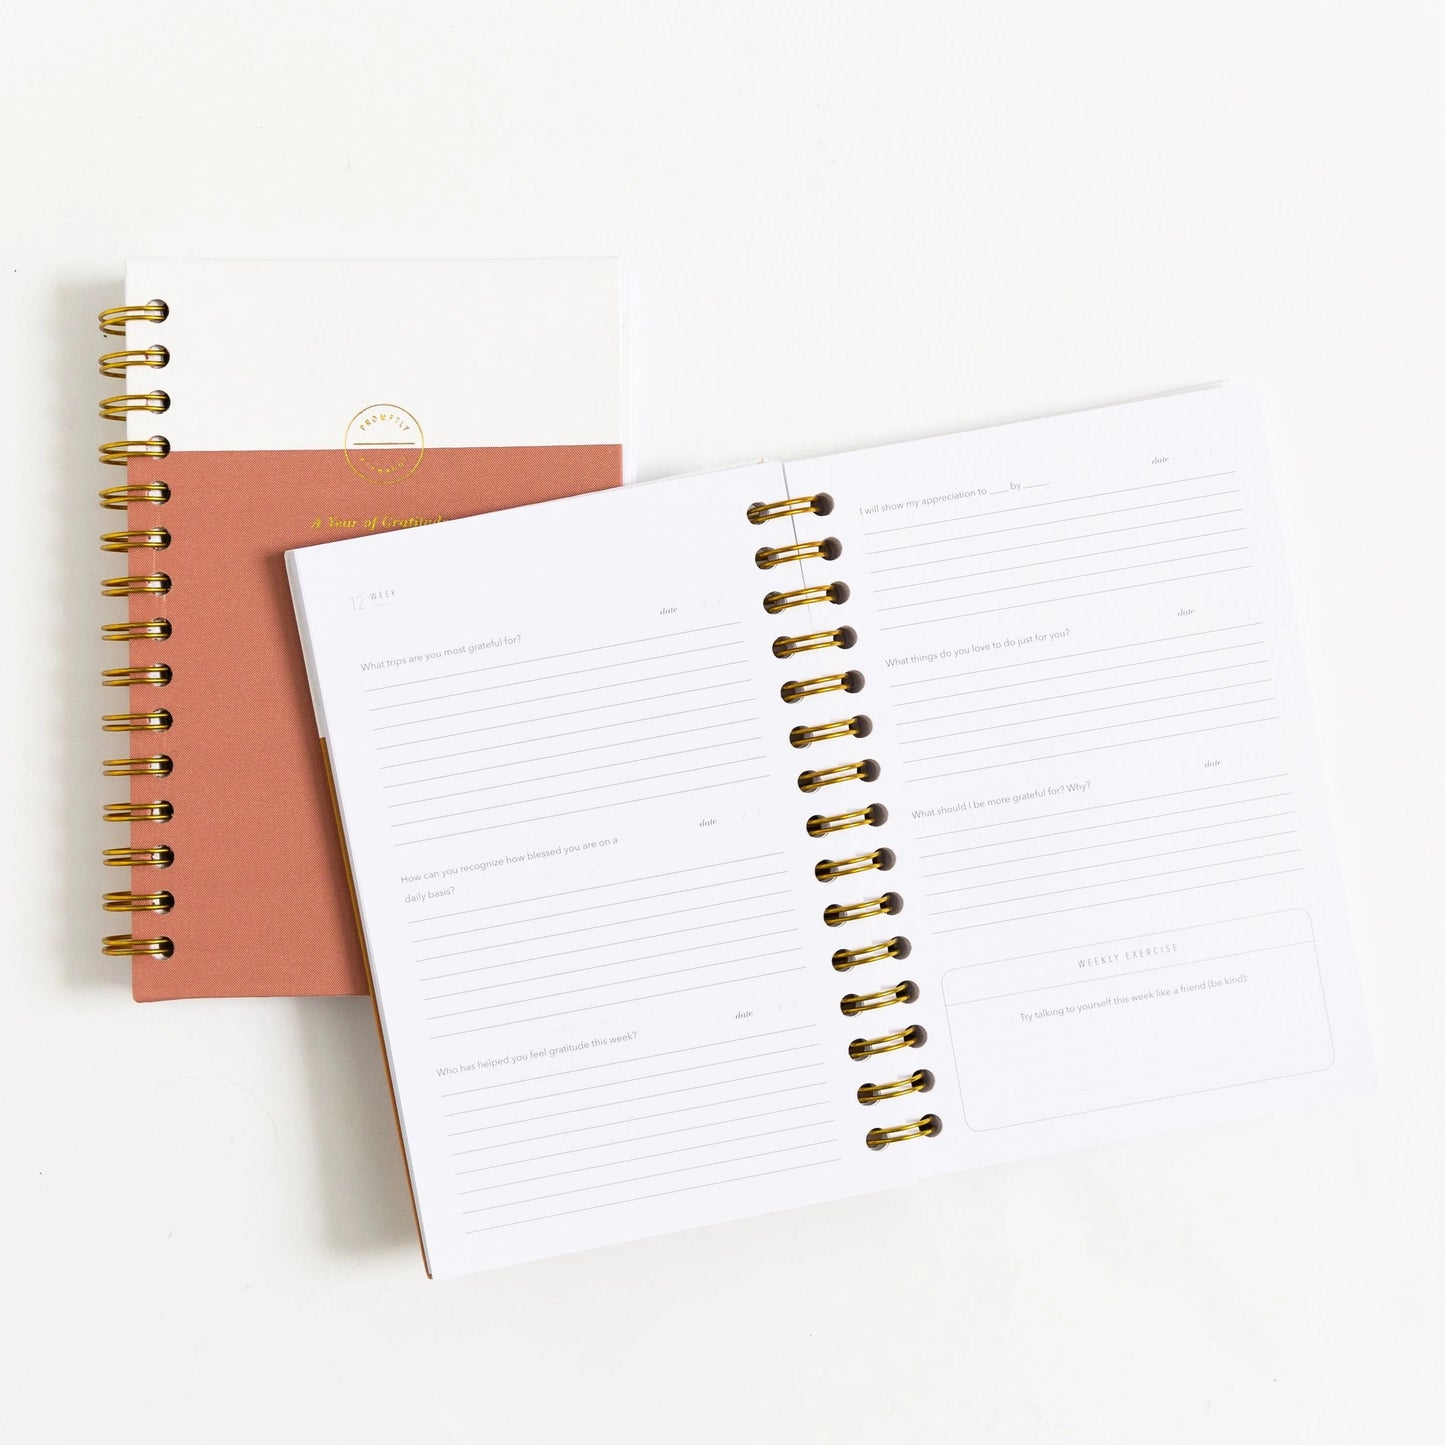 Gratitude Journals - Dusty Rose by Promptly Journals